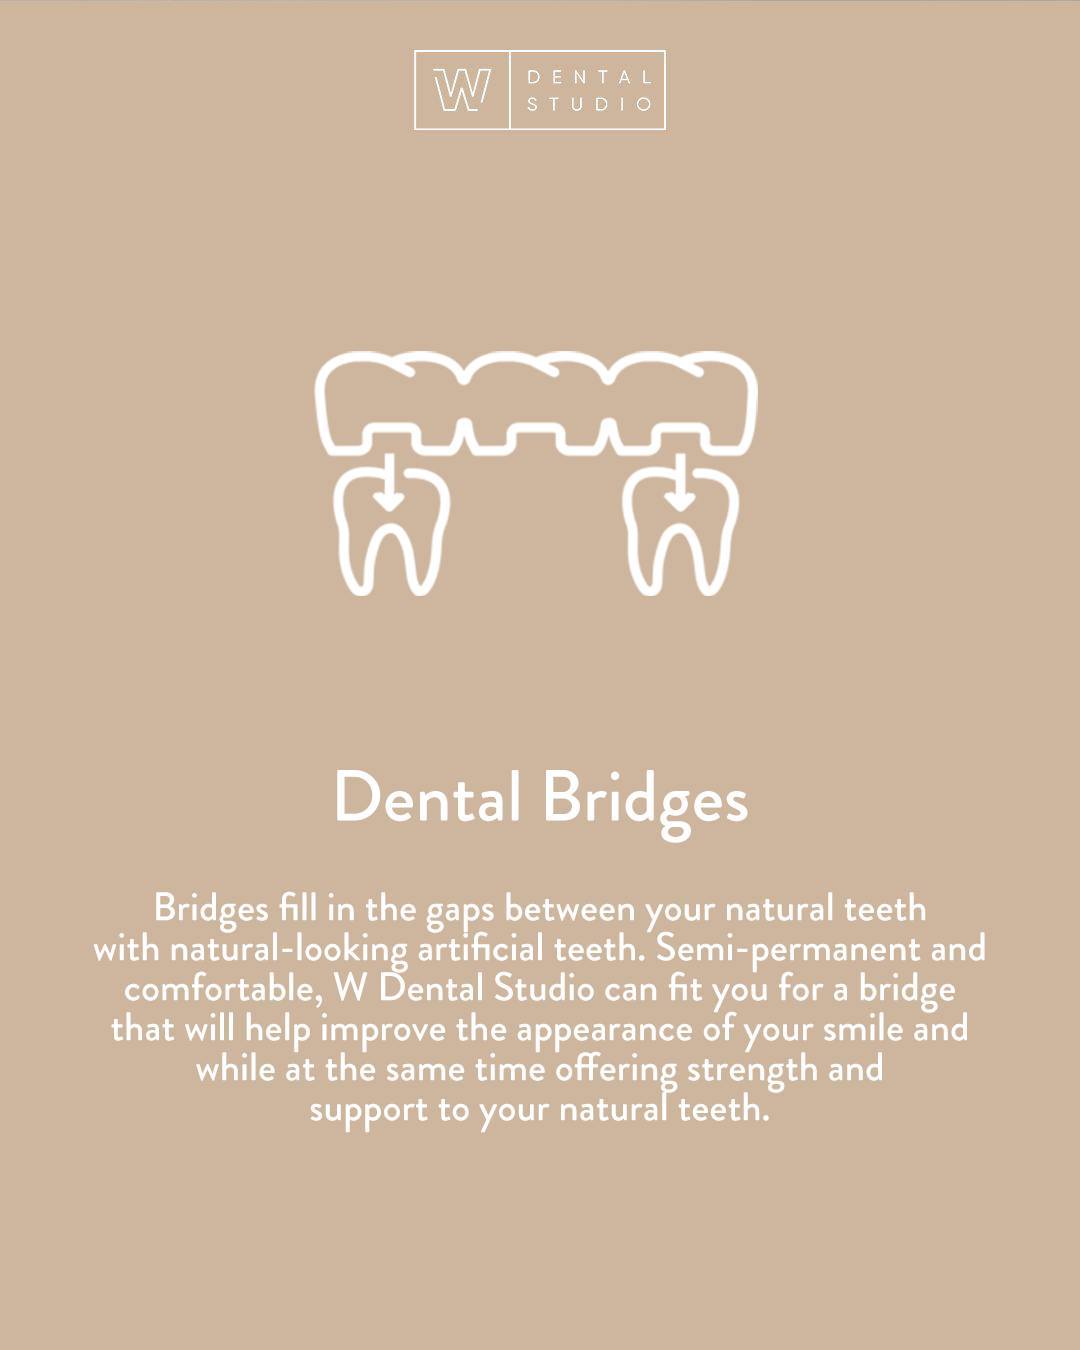 Are you suffering from missing teeth, or becoming frustrated because you’re having trouble chewing, speaking or even biting food? If so, a bridge may be right for you. Bridges fill in the gaps between your natural teeth with natural-looking artificial teeth. Semi-permanent and comfortable, W Dental Studio can fit you for a bridge that will help improve the appearance of your smile and while at the same time offering strength and support to your natural teeth.

Book an appointment: 

📞 613-564-3300
📍 270 Richmond Rd, Ottawa, ON
💻 https://www.wdentalstudio.com
📧 info@wdentalstudio.com